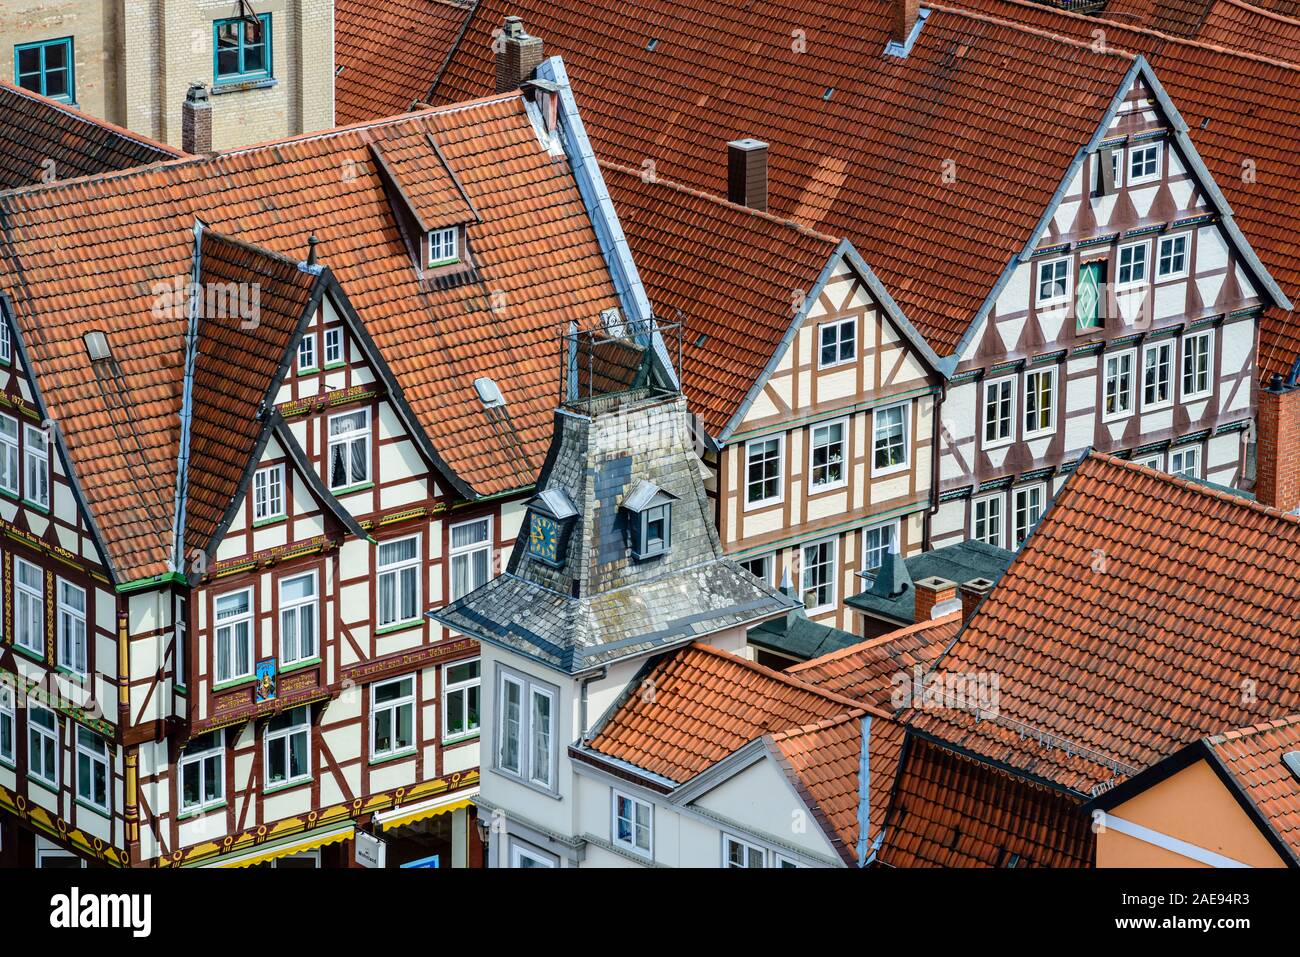 View over the rooftops of the medieval old town of Celle, from the tower of the town church, Stadtkirche, Celle, Lower Saxony, Germany Stock Photo